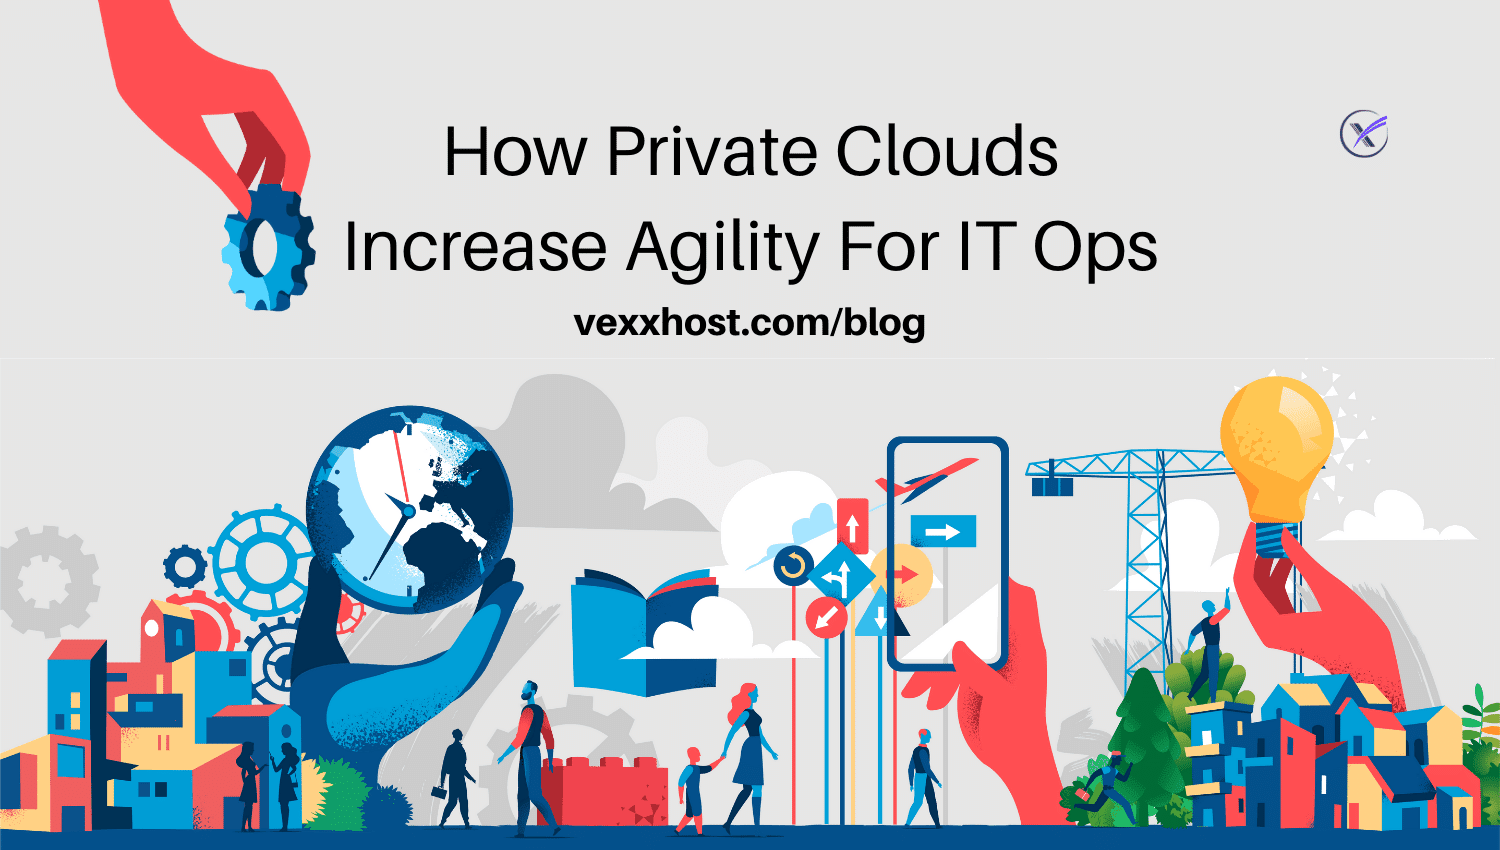 How-Private-Clouds-Increase-Agility-for-IT-Ops